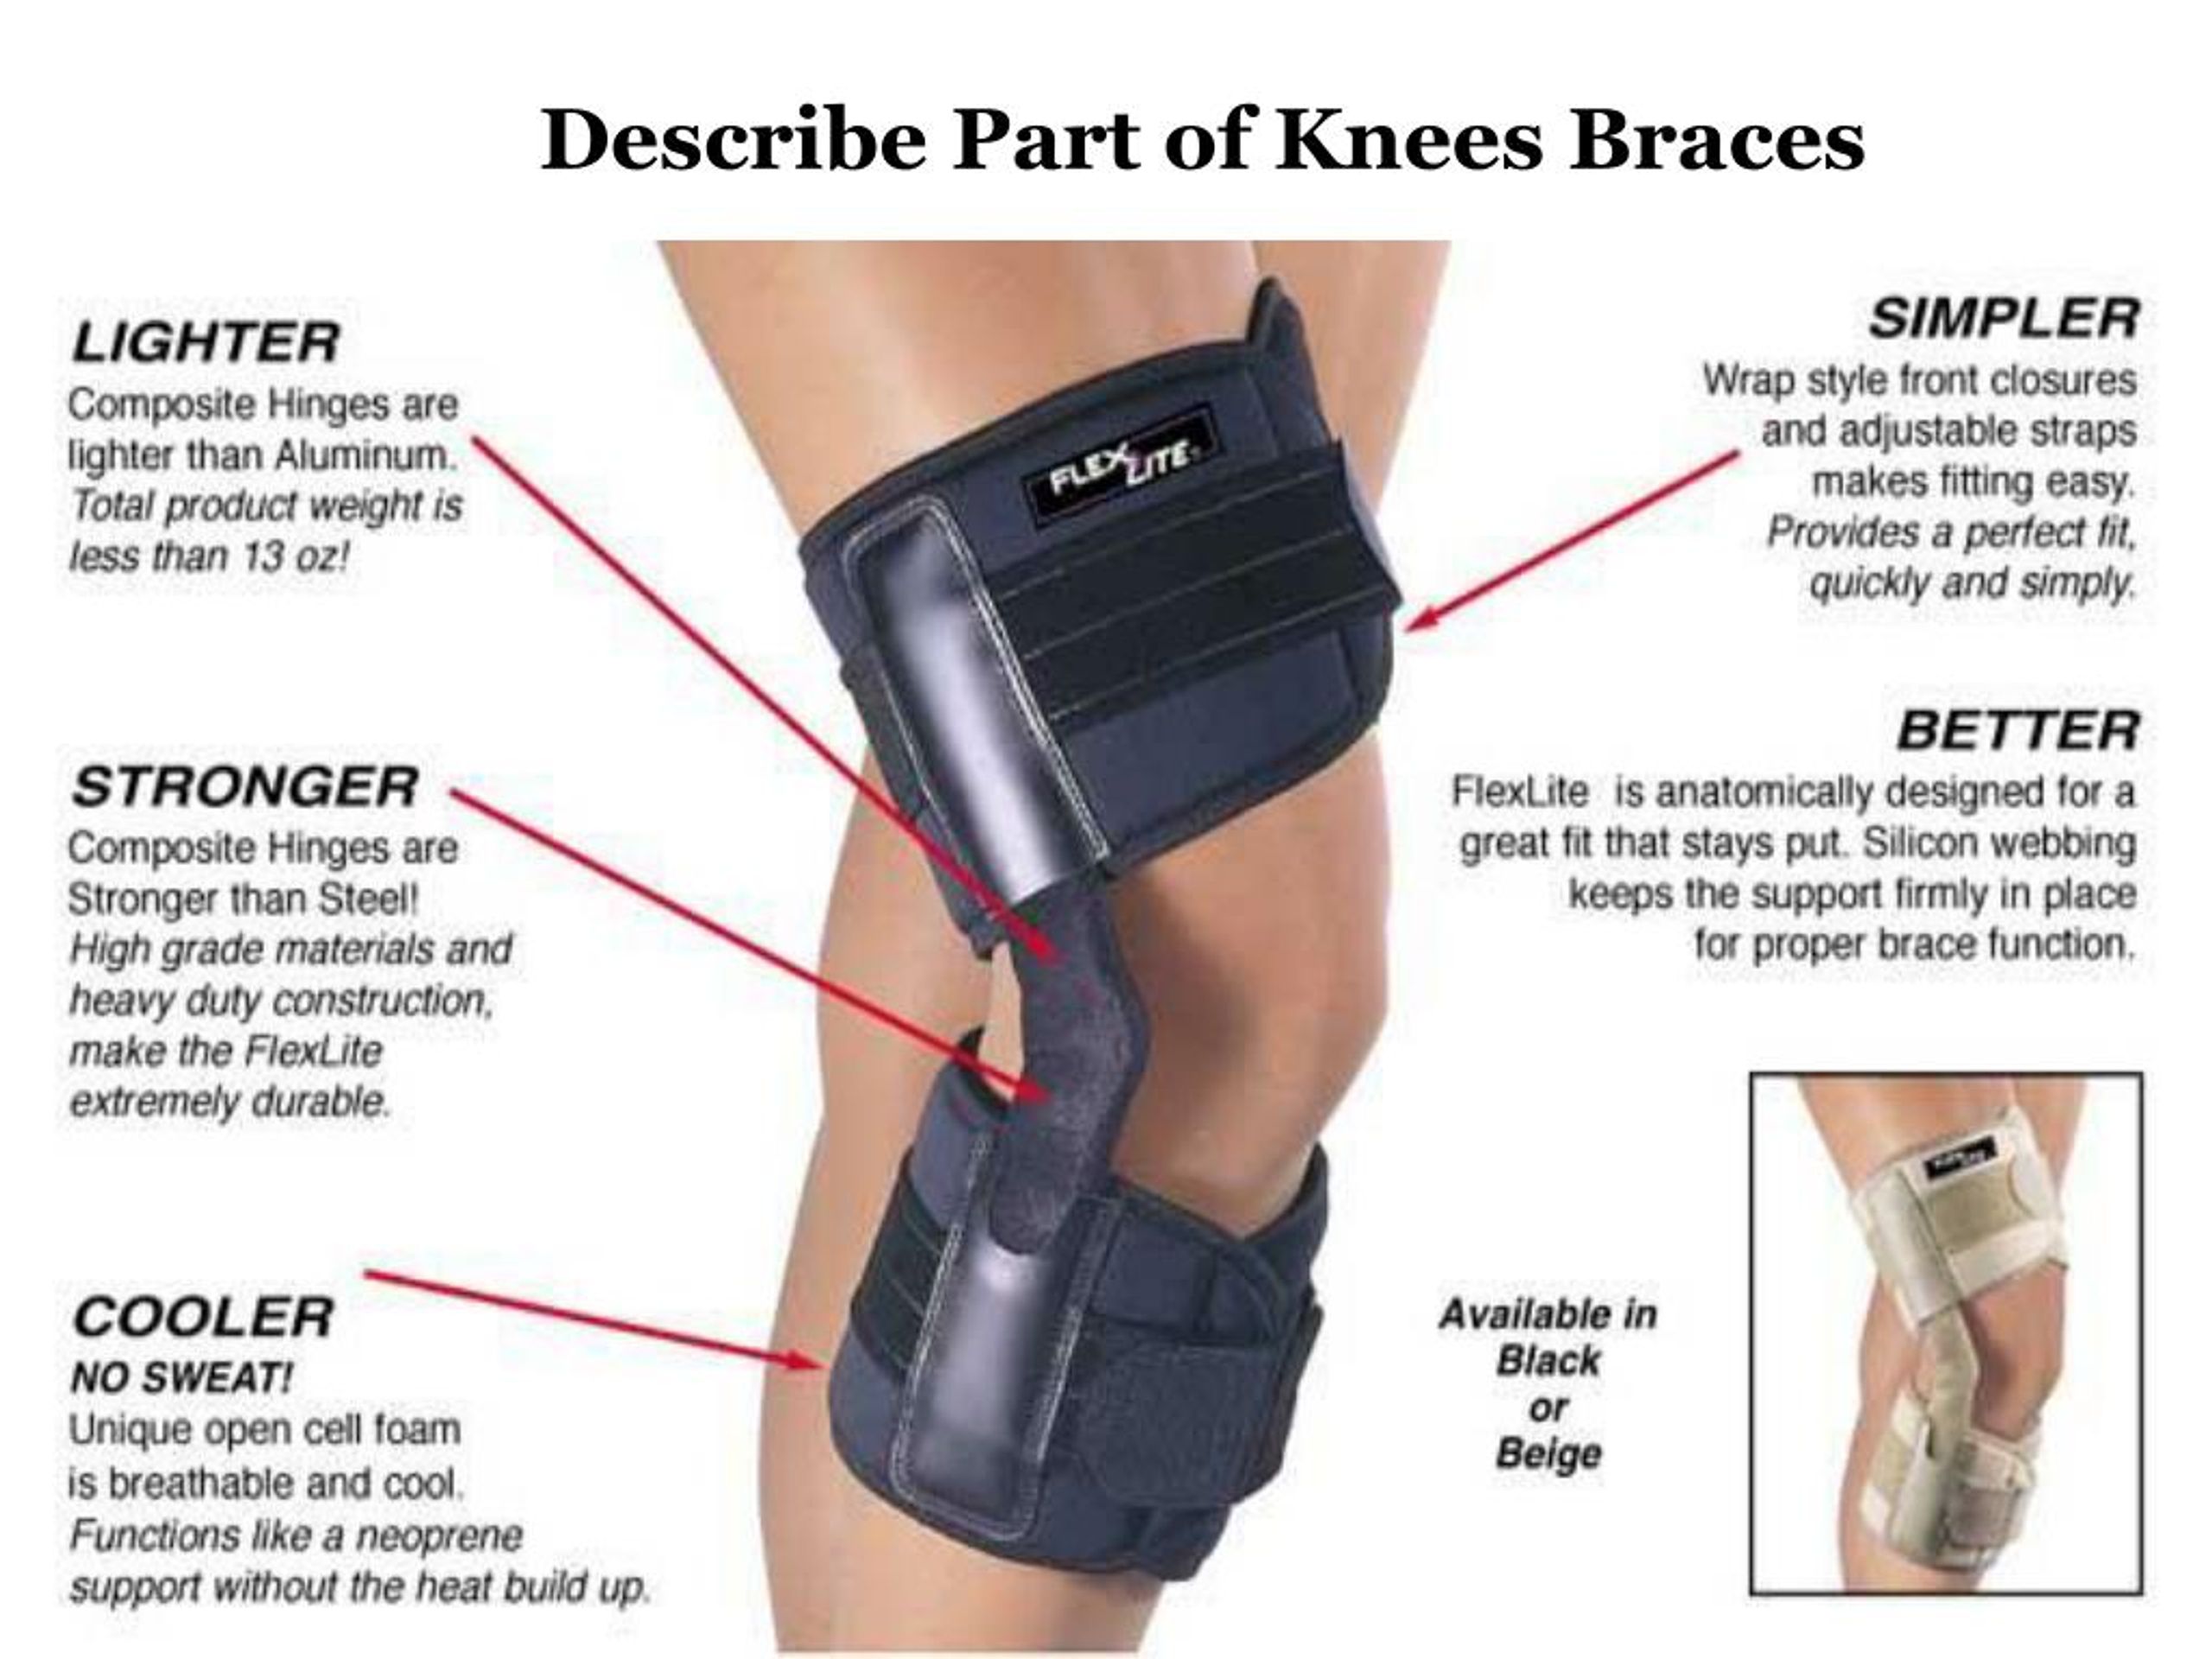 PPT - What are knee braces? PowerPoint Presentation, free download - ID ...